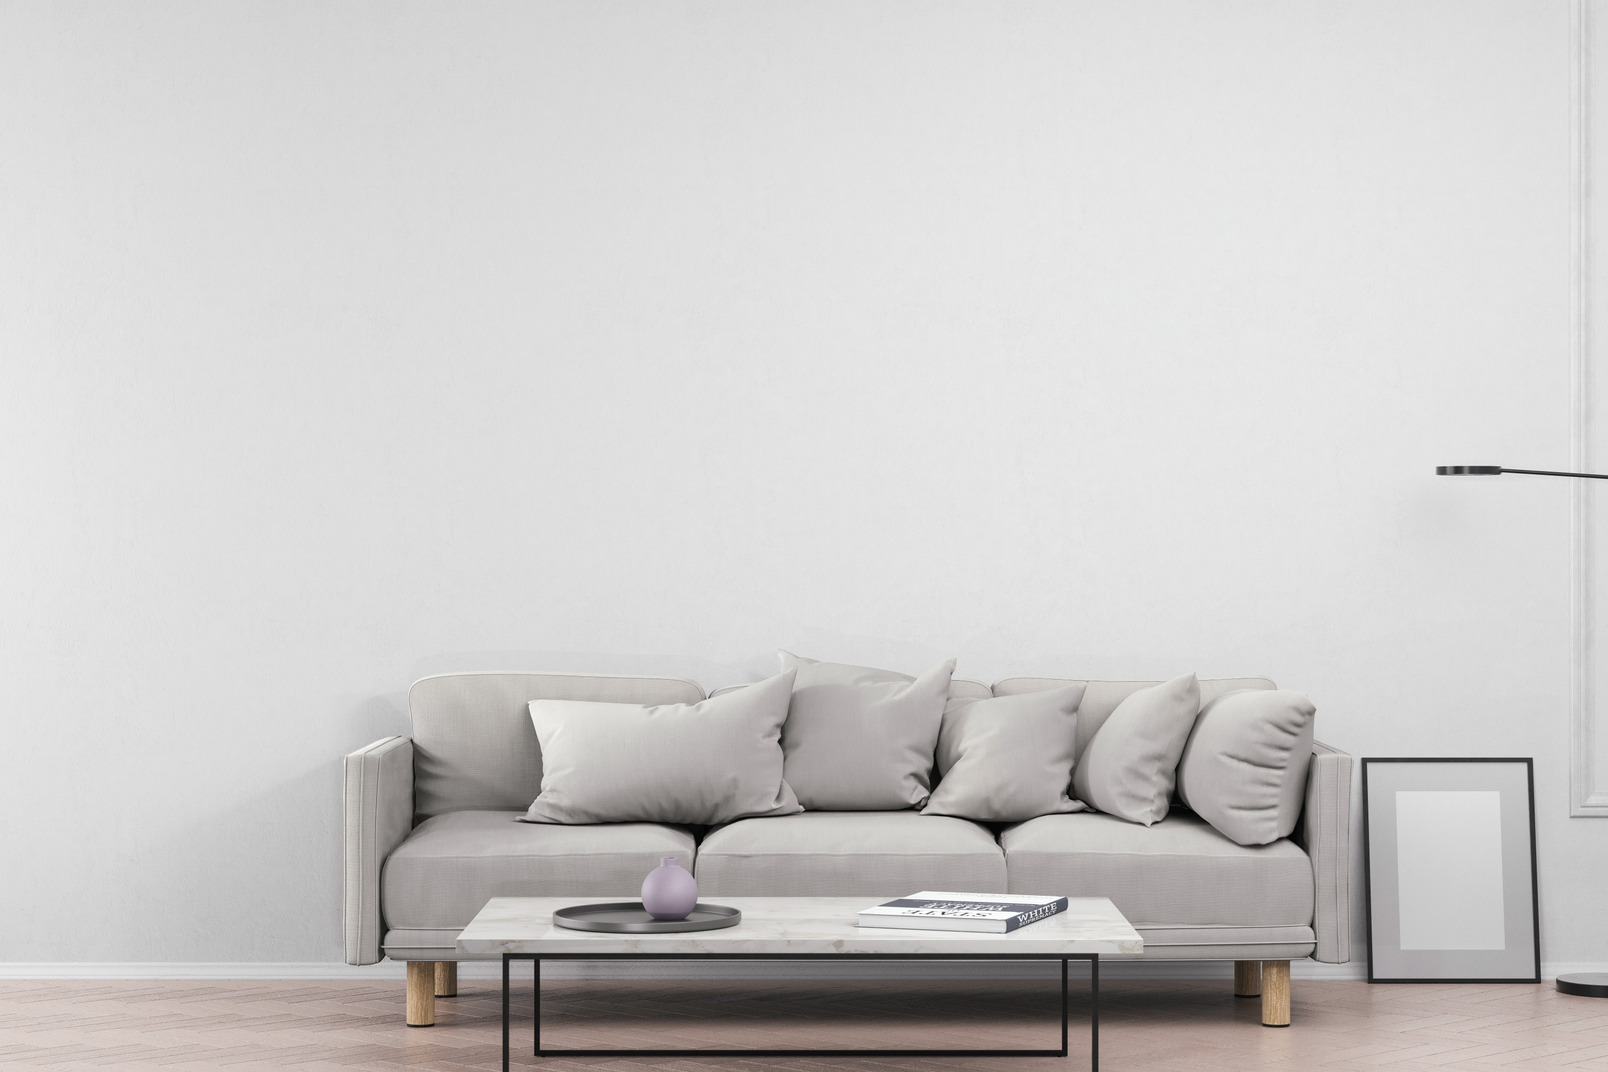 A cozy living room in grey colors, with a sofa and a coffee table in front of it